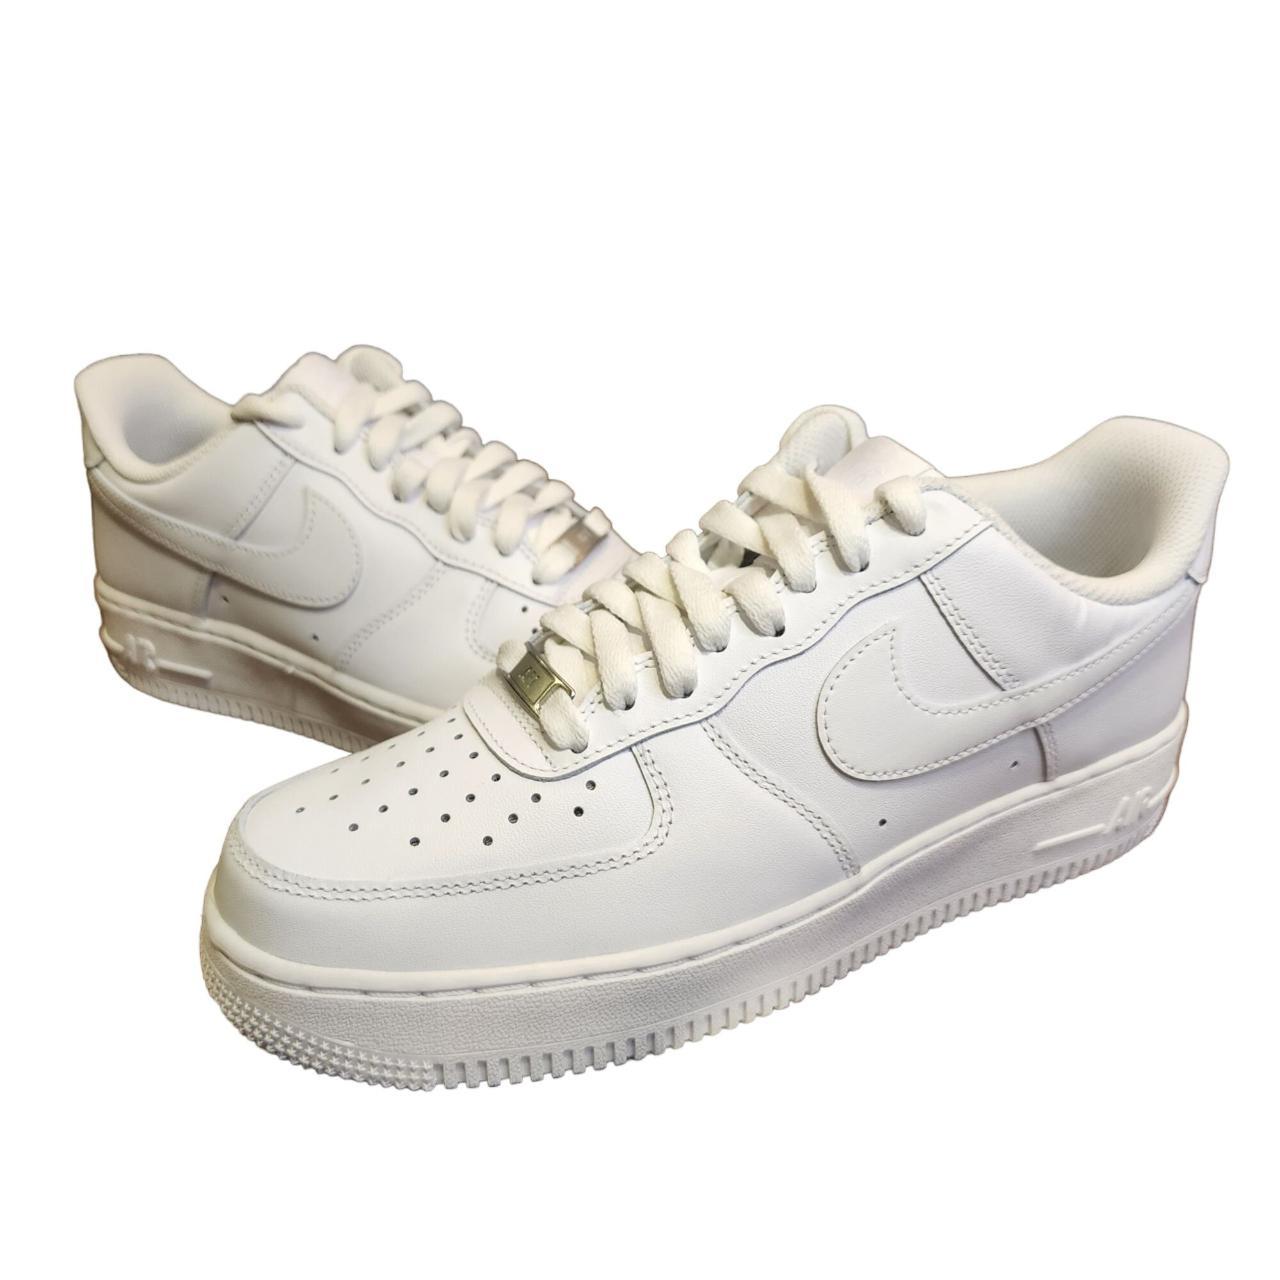 Nike Women's Air Force 1 Low 82 Skate Shoes